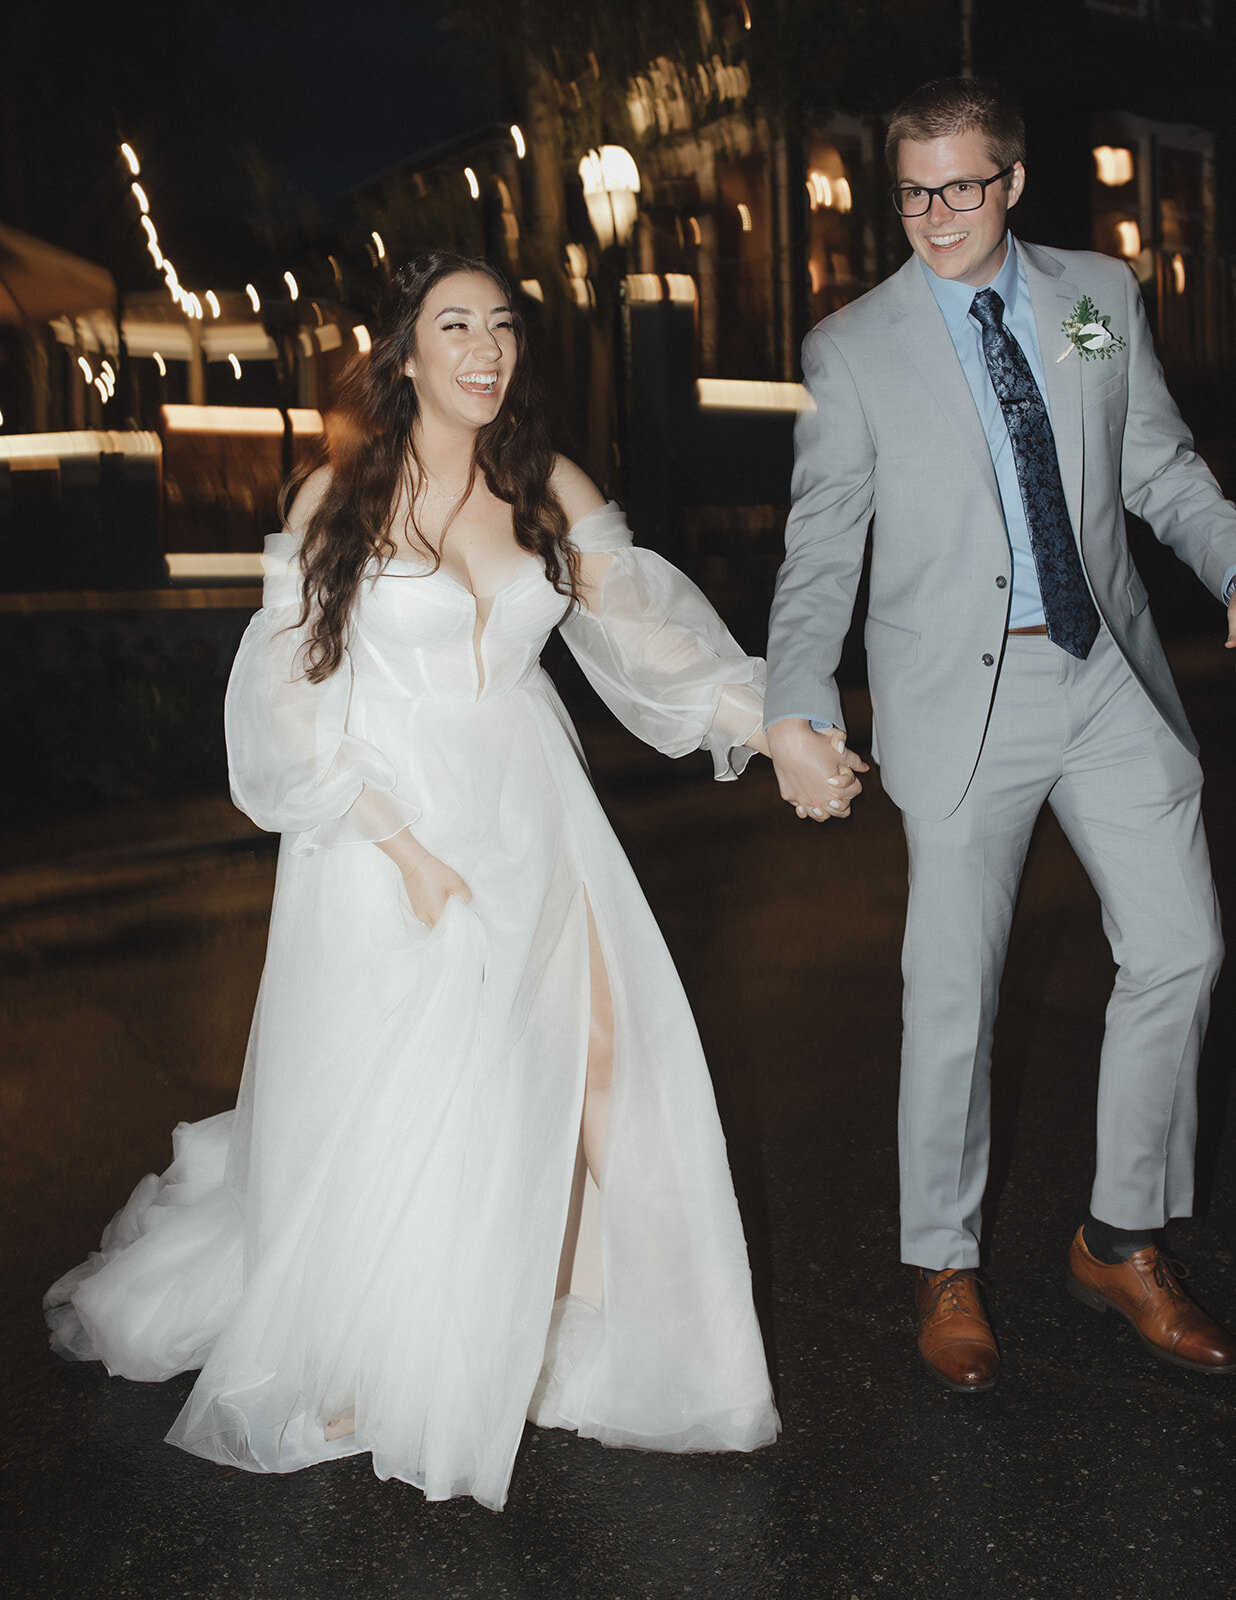 Bride and groom holding each other's hand while happily walking